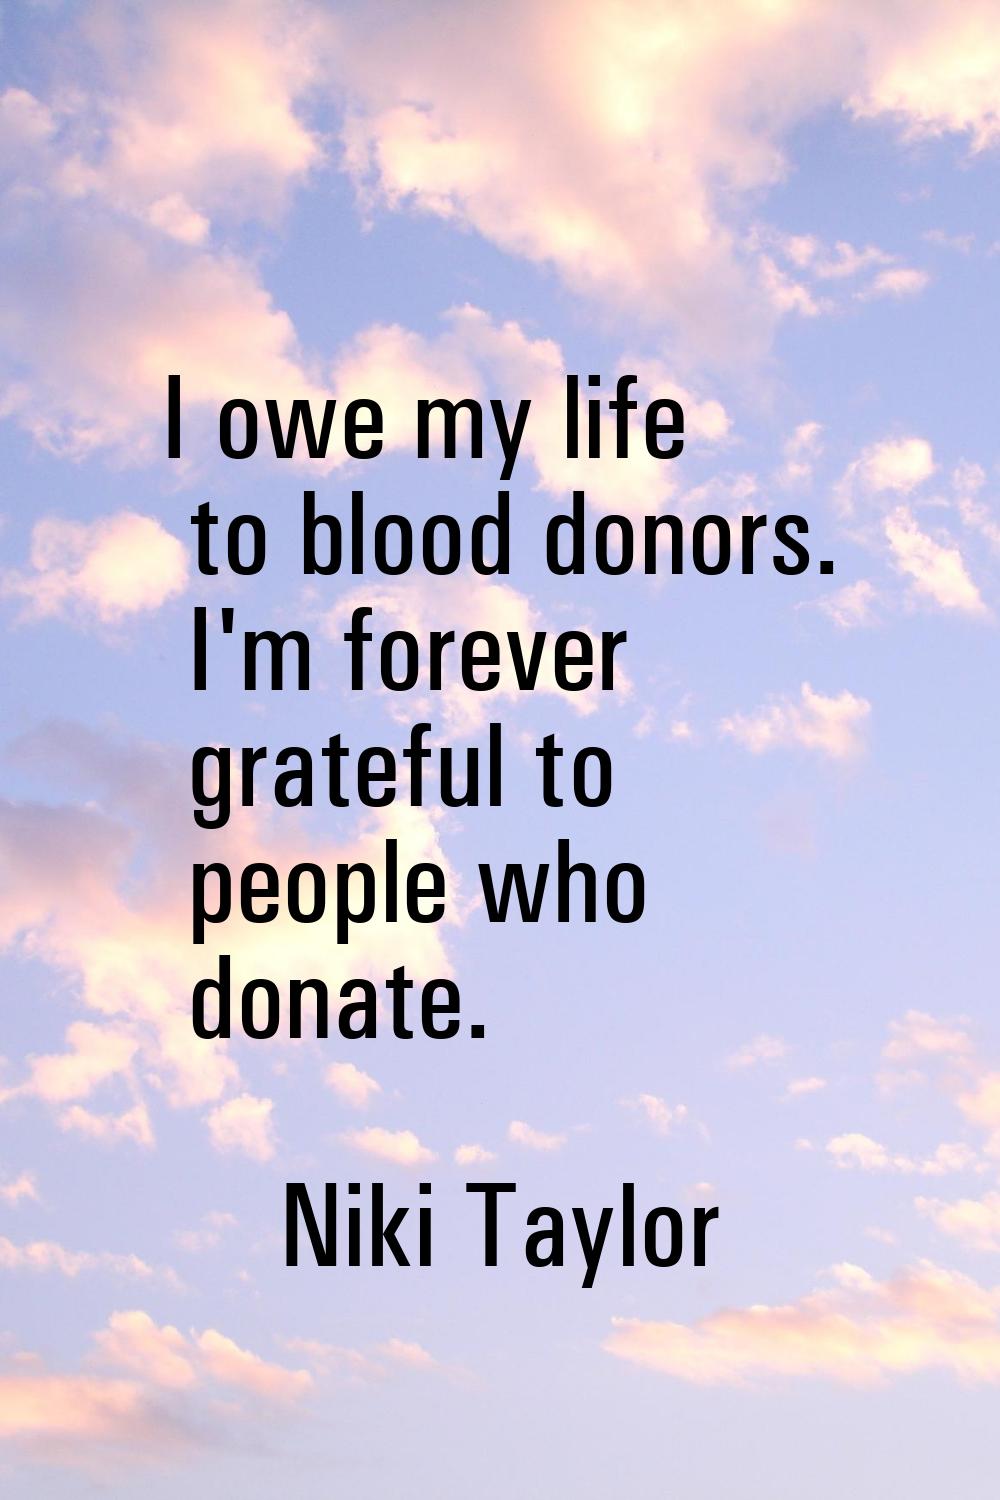 I owe my life to blood donors. I'm forever grateful to people who donate.